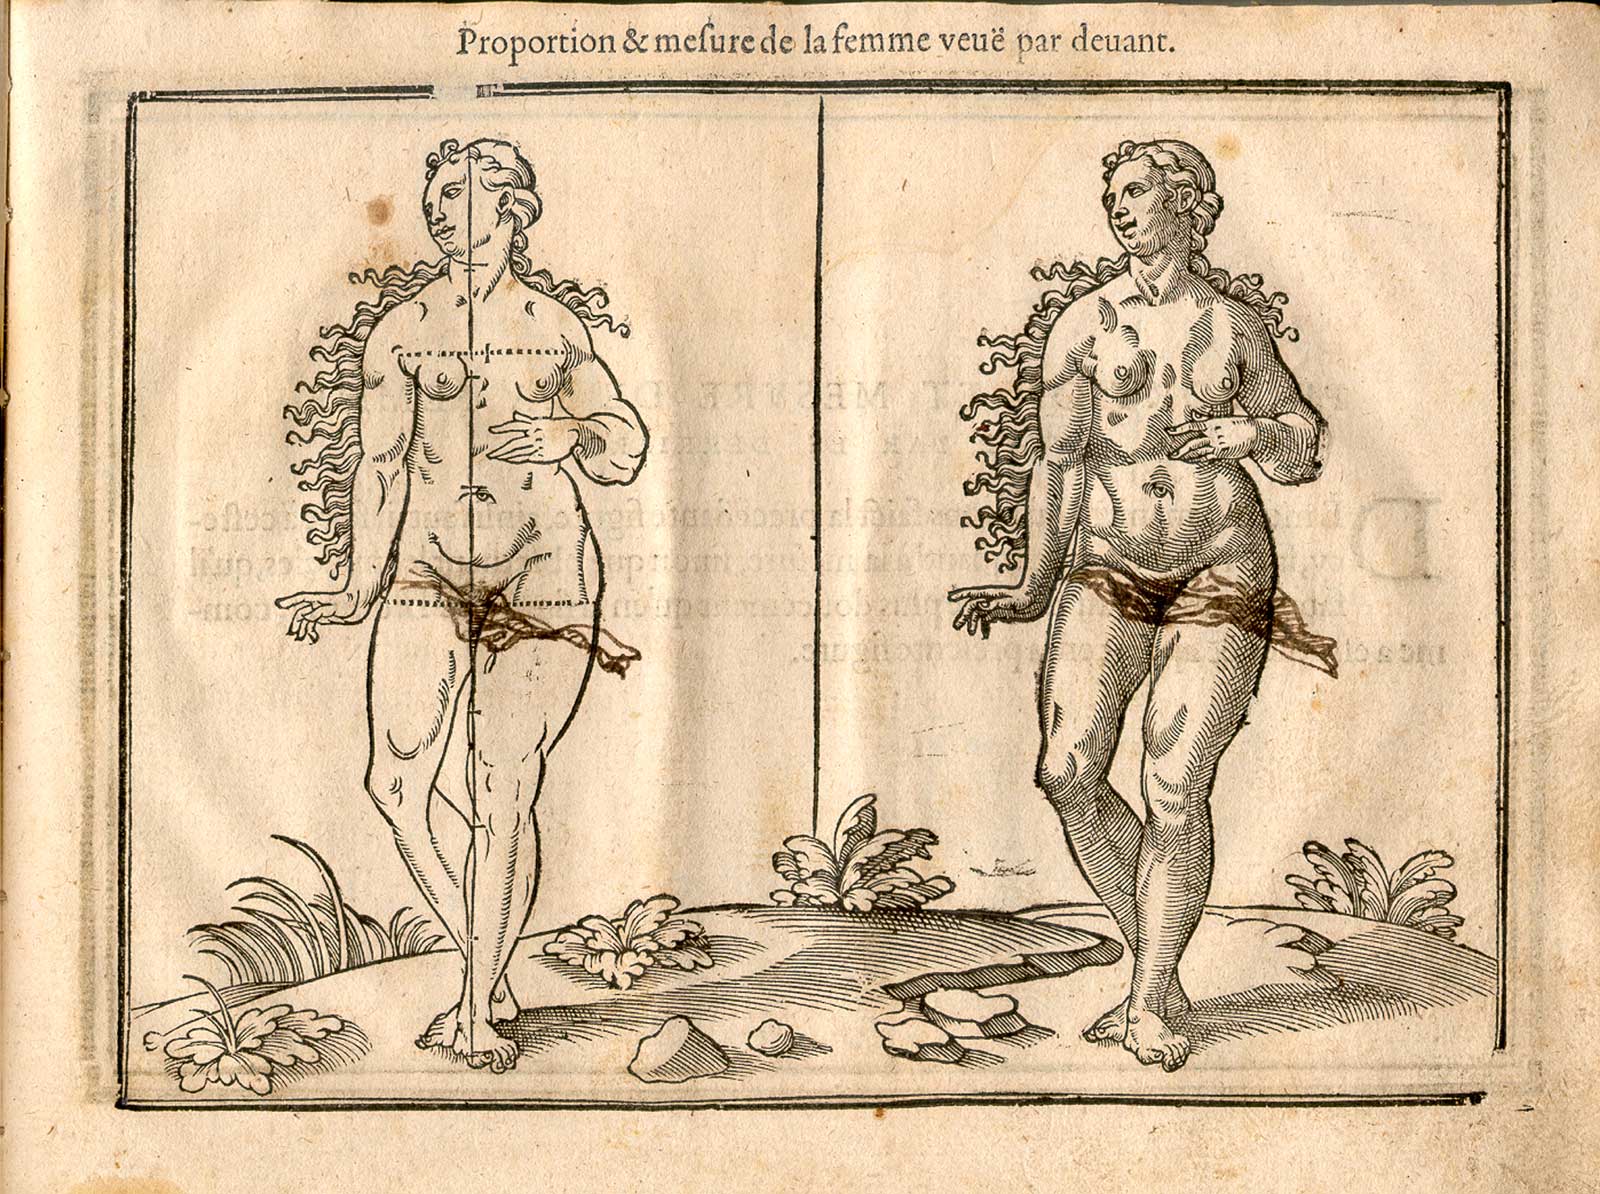 Woodcut illustration of two nude female facing anatomical figures, both images in identical poses facing slightly to the left in a pastoral setting, with the left hand image showing the proportions of the figure measured out, from Jehan Cousin’s Livre de pourtraiture, NLM Call no.: WZ 250 C8673L 1608.